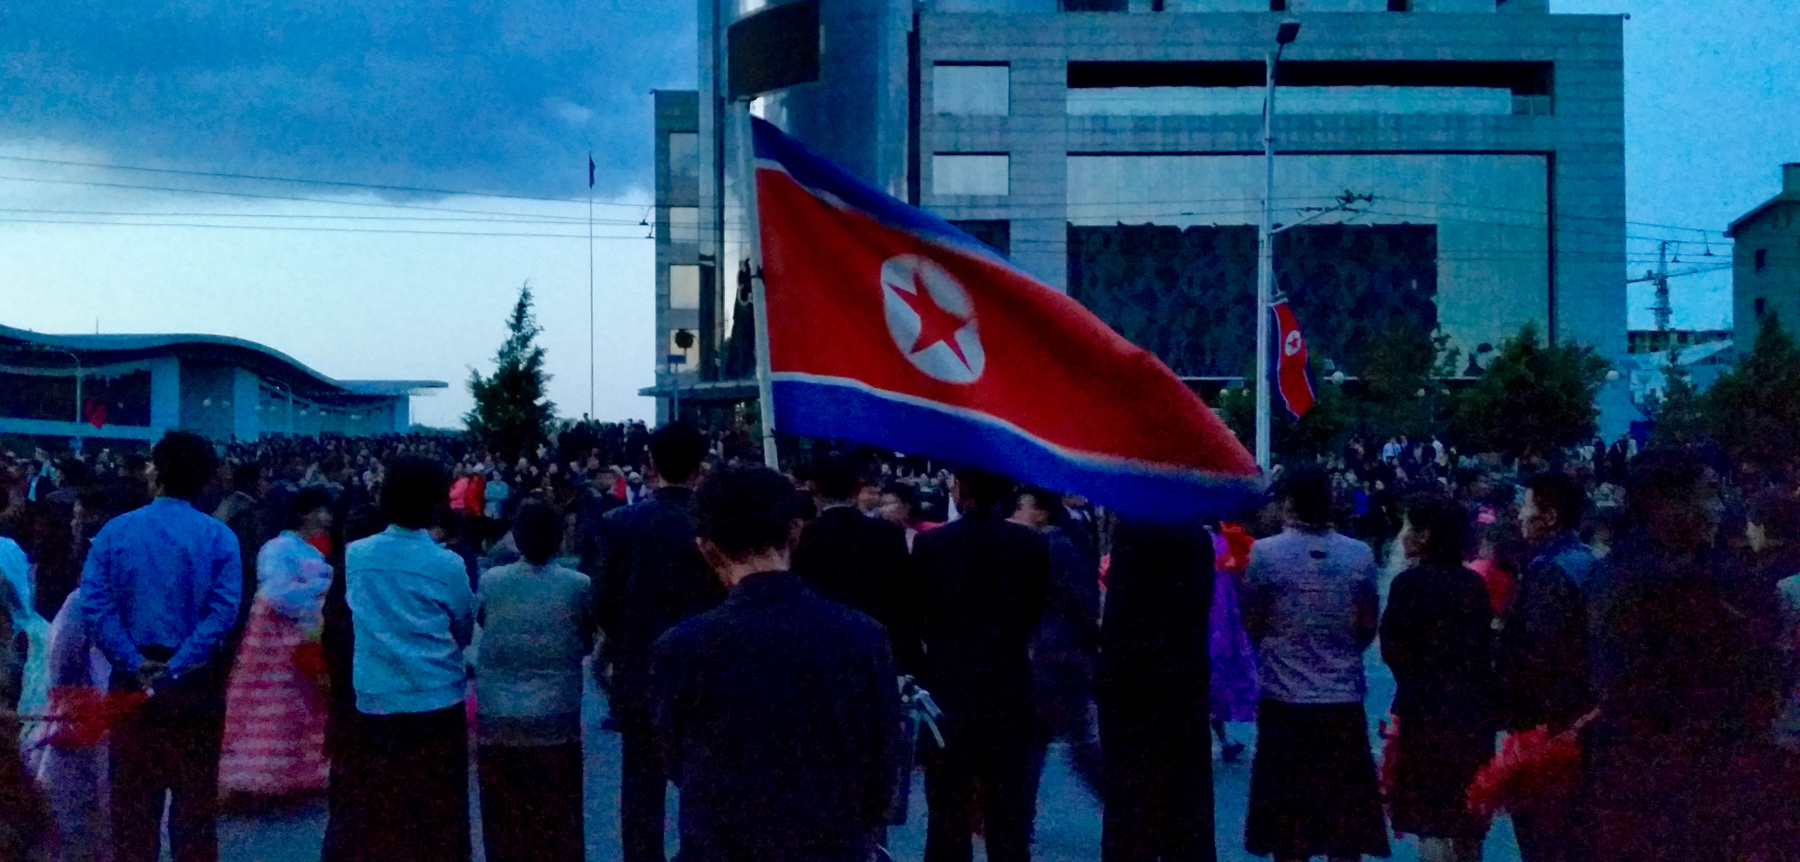 This is one of the last photos I could take that night before it got too dark. Many people were carrying large flags like this on flagpoles, and waving them around.